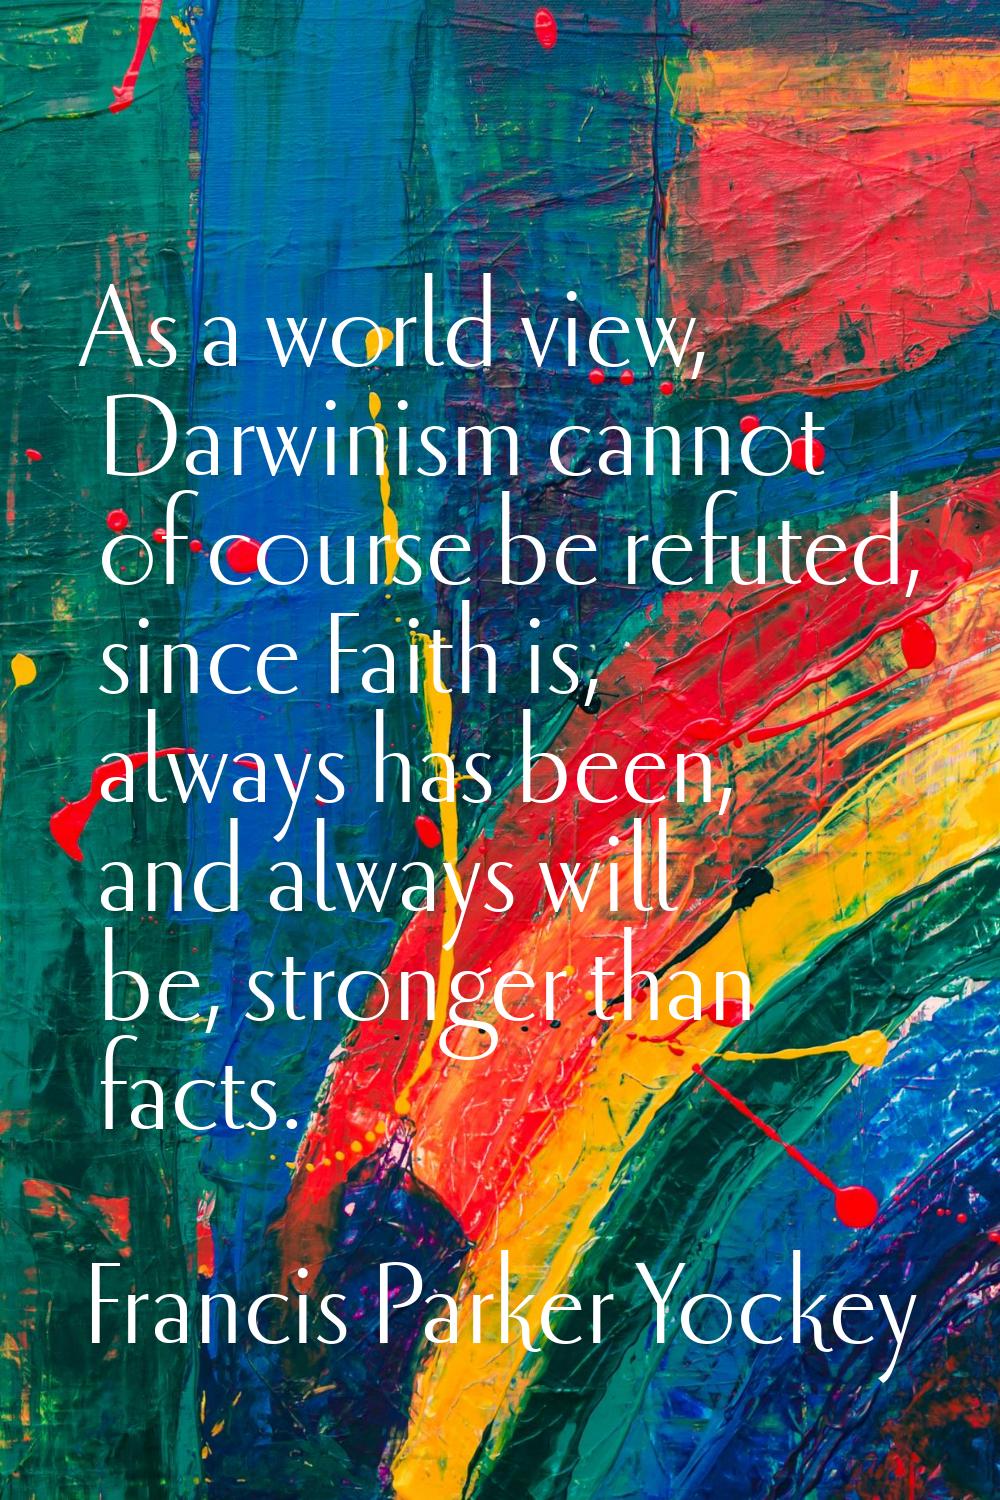 As a world view, Darwinism cannot of course be refuted, since Faith is, always has been, and always